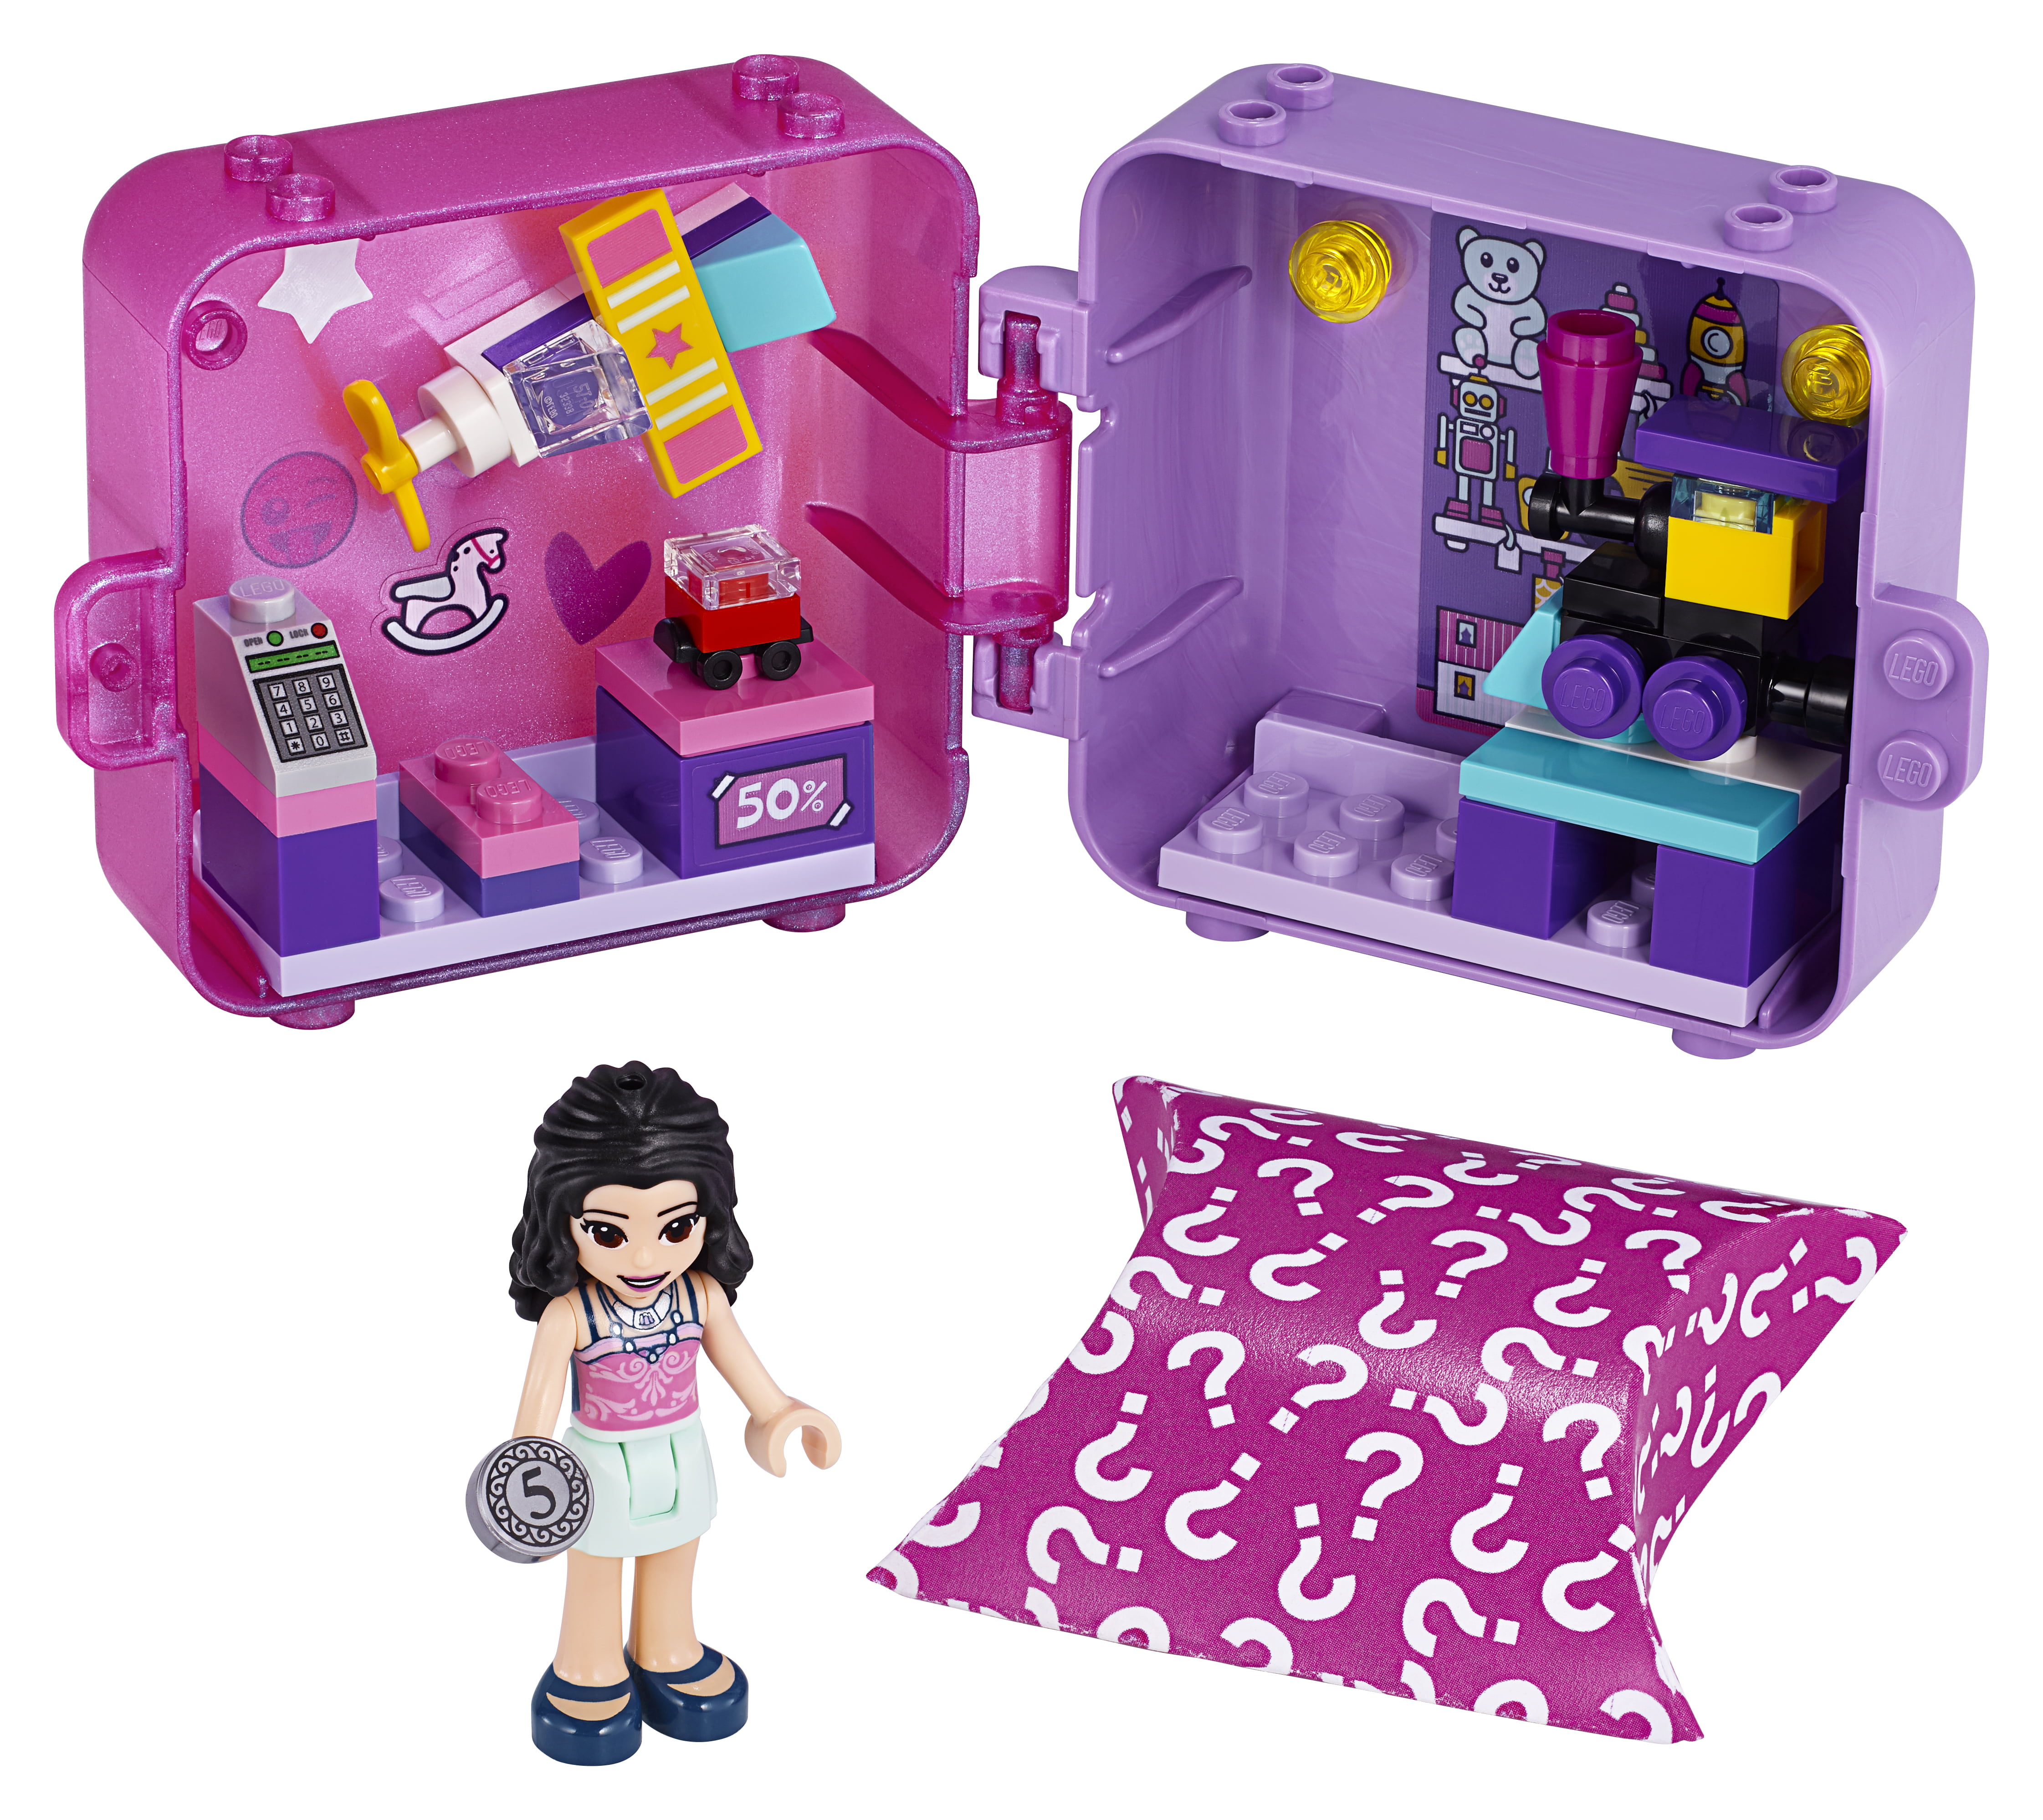  Building Block Set for Girls and Friends Villa Forest House  Building Kit, with Portable Storage Box, Makes an Entertaining Learning  Construction Toys Christmas Birthday Gift for Kids Boys Girls 6-12 